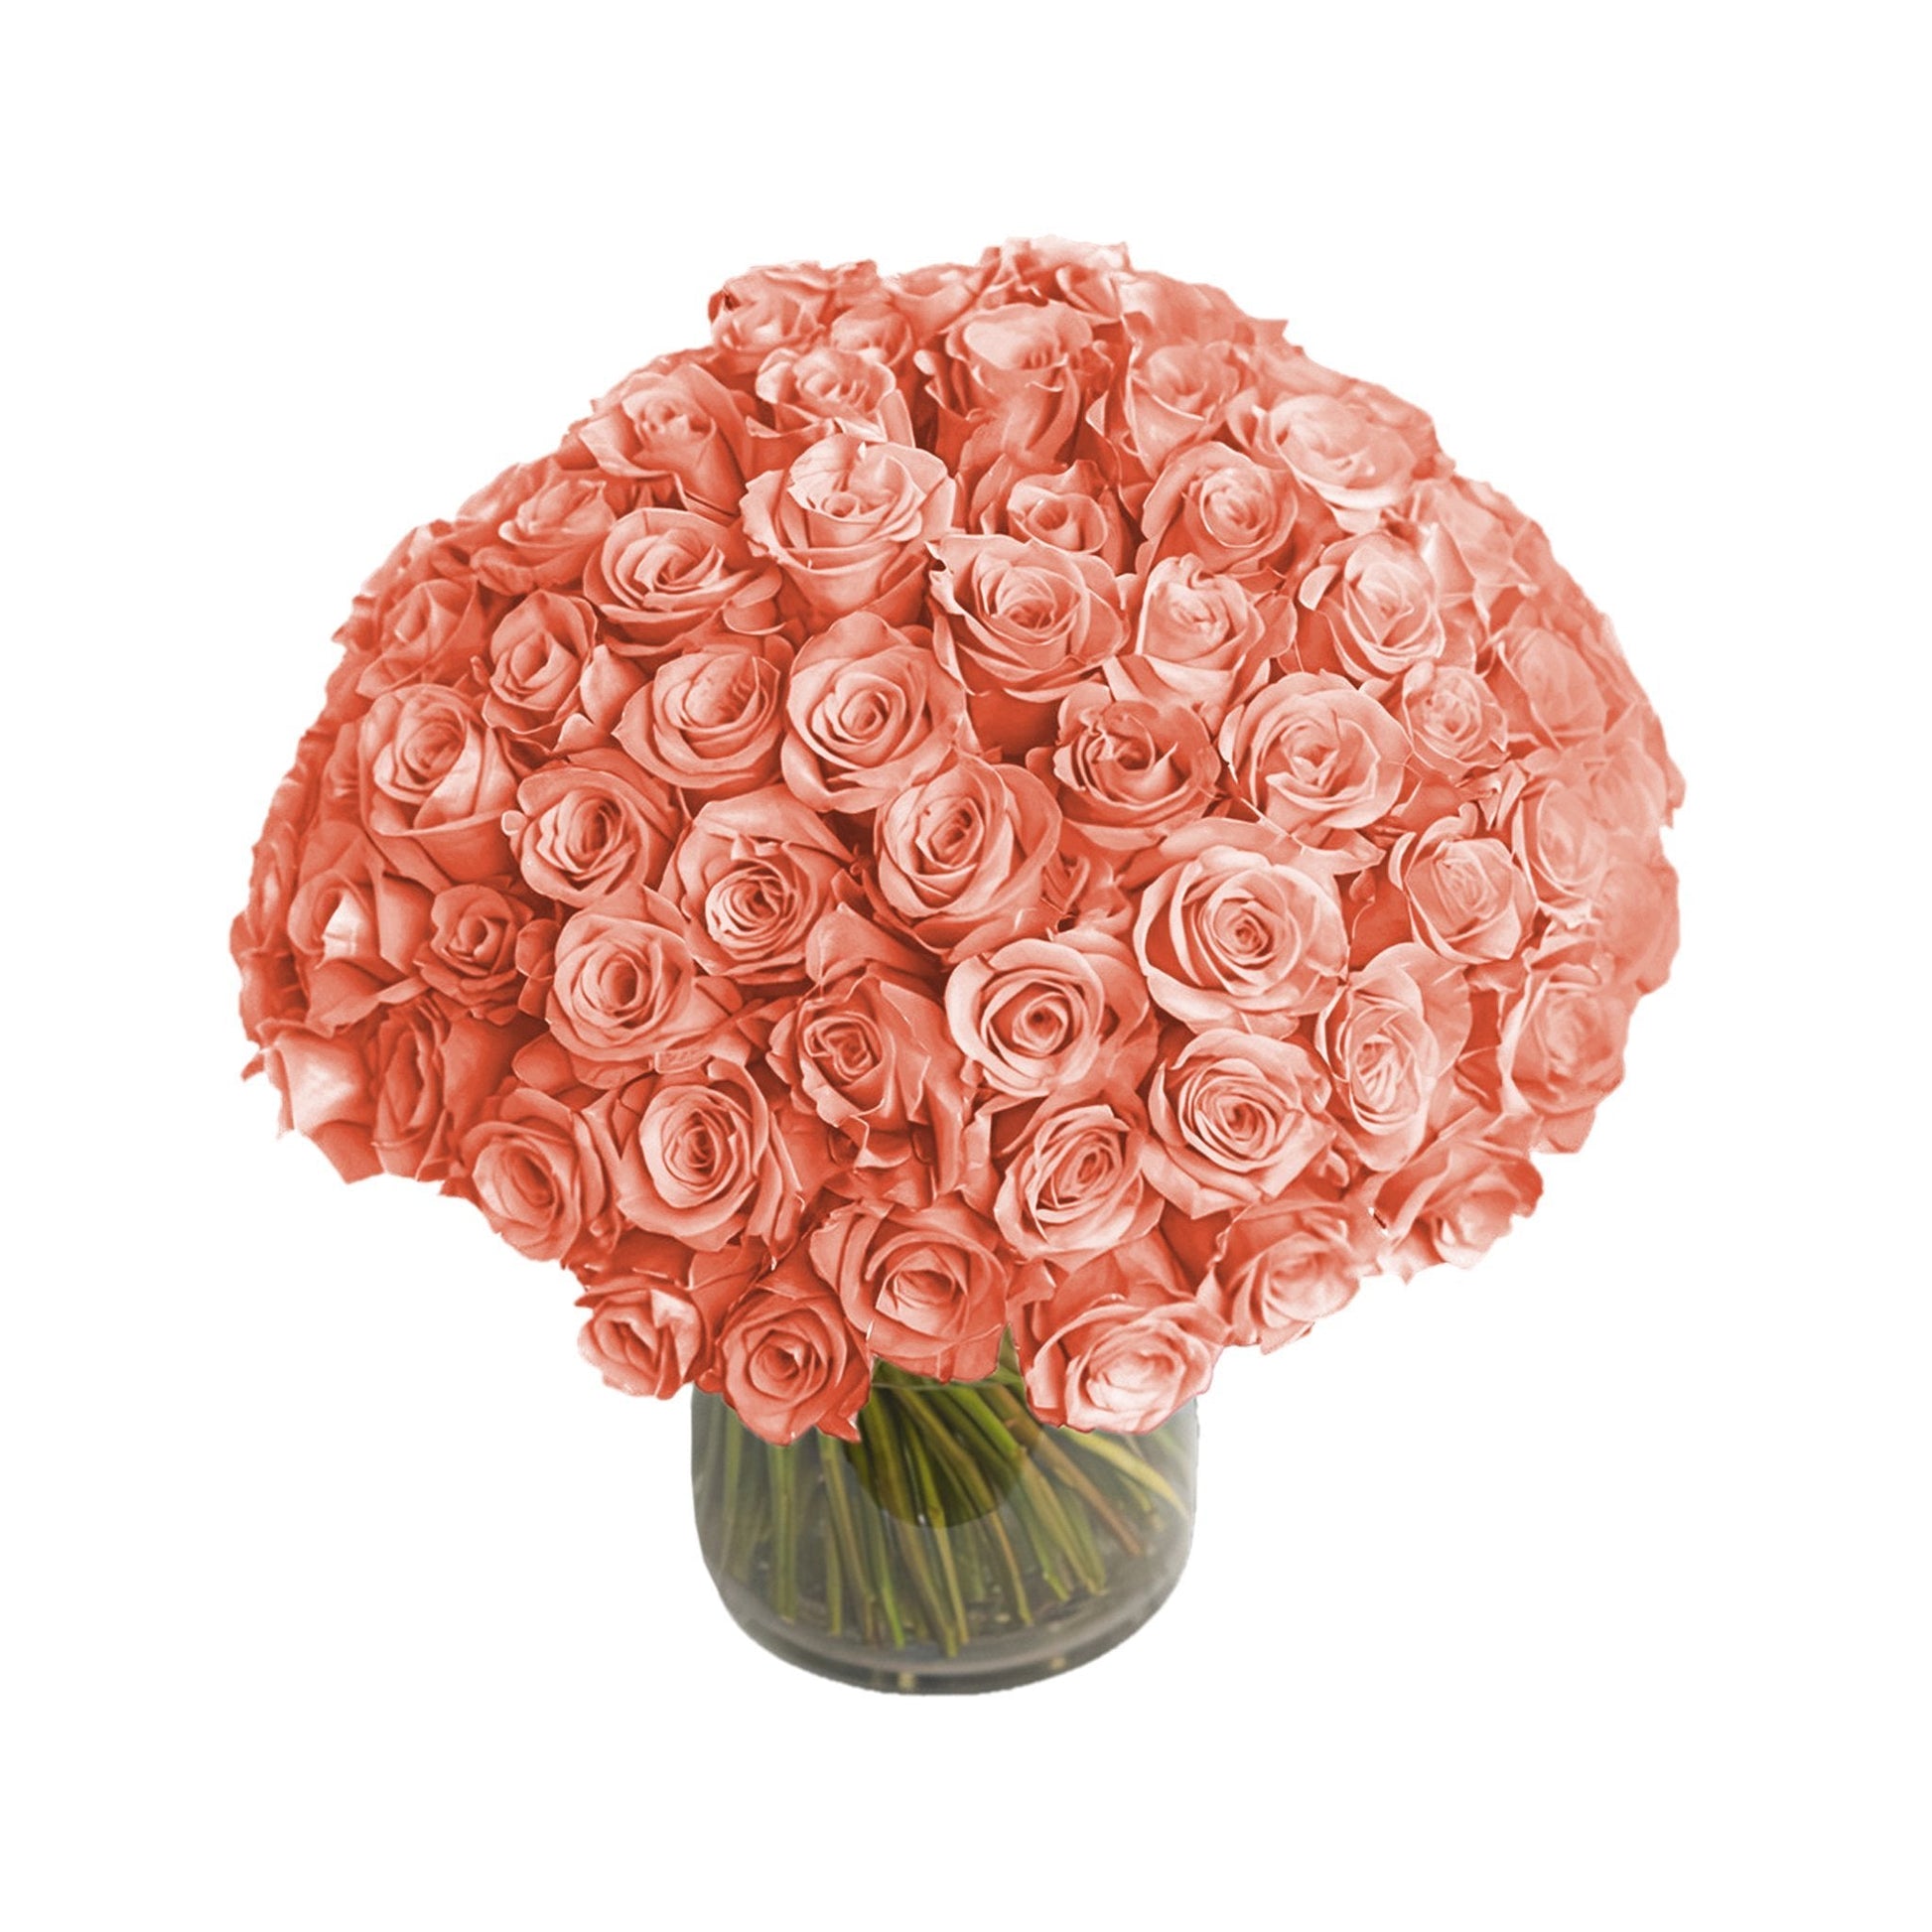 Fresh Roses in a Vase | 100 Peach Roses - Floral_Arrangement - Flower Delivery NYC